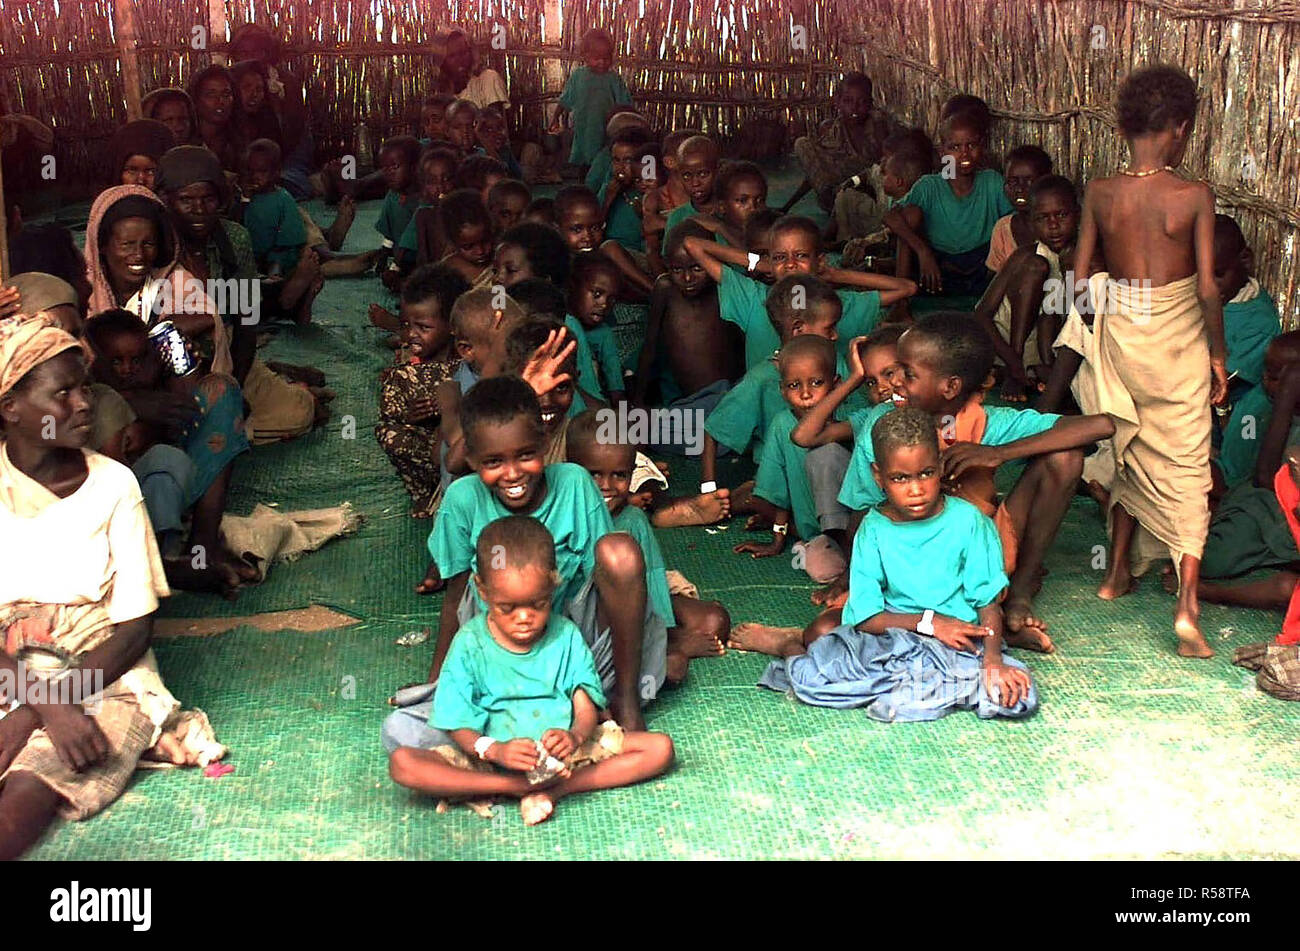 1992 - Straight on shot inside a bamboo hut at several Somali children sitting in rows on a green mat.  Almost all of the children are wearing green t-shirts.  Some older Somali women are seen sitting in a row at the left of the frame. Stock Photo